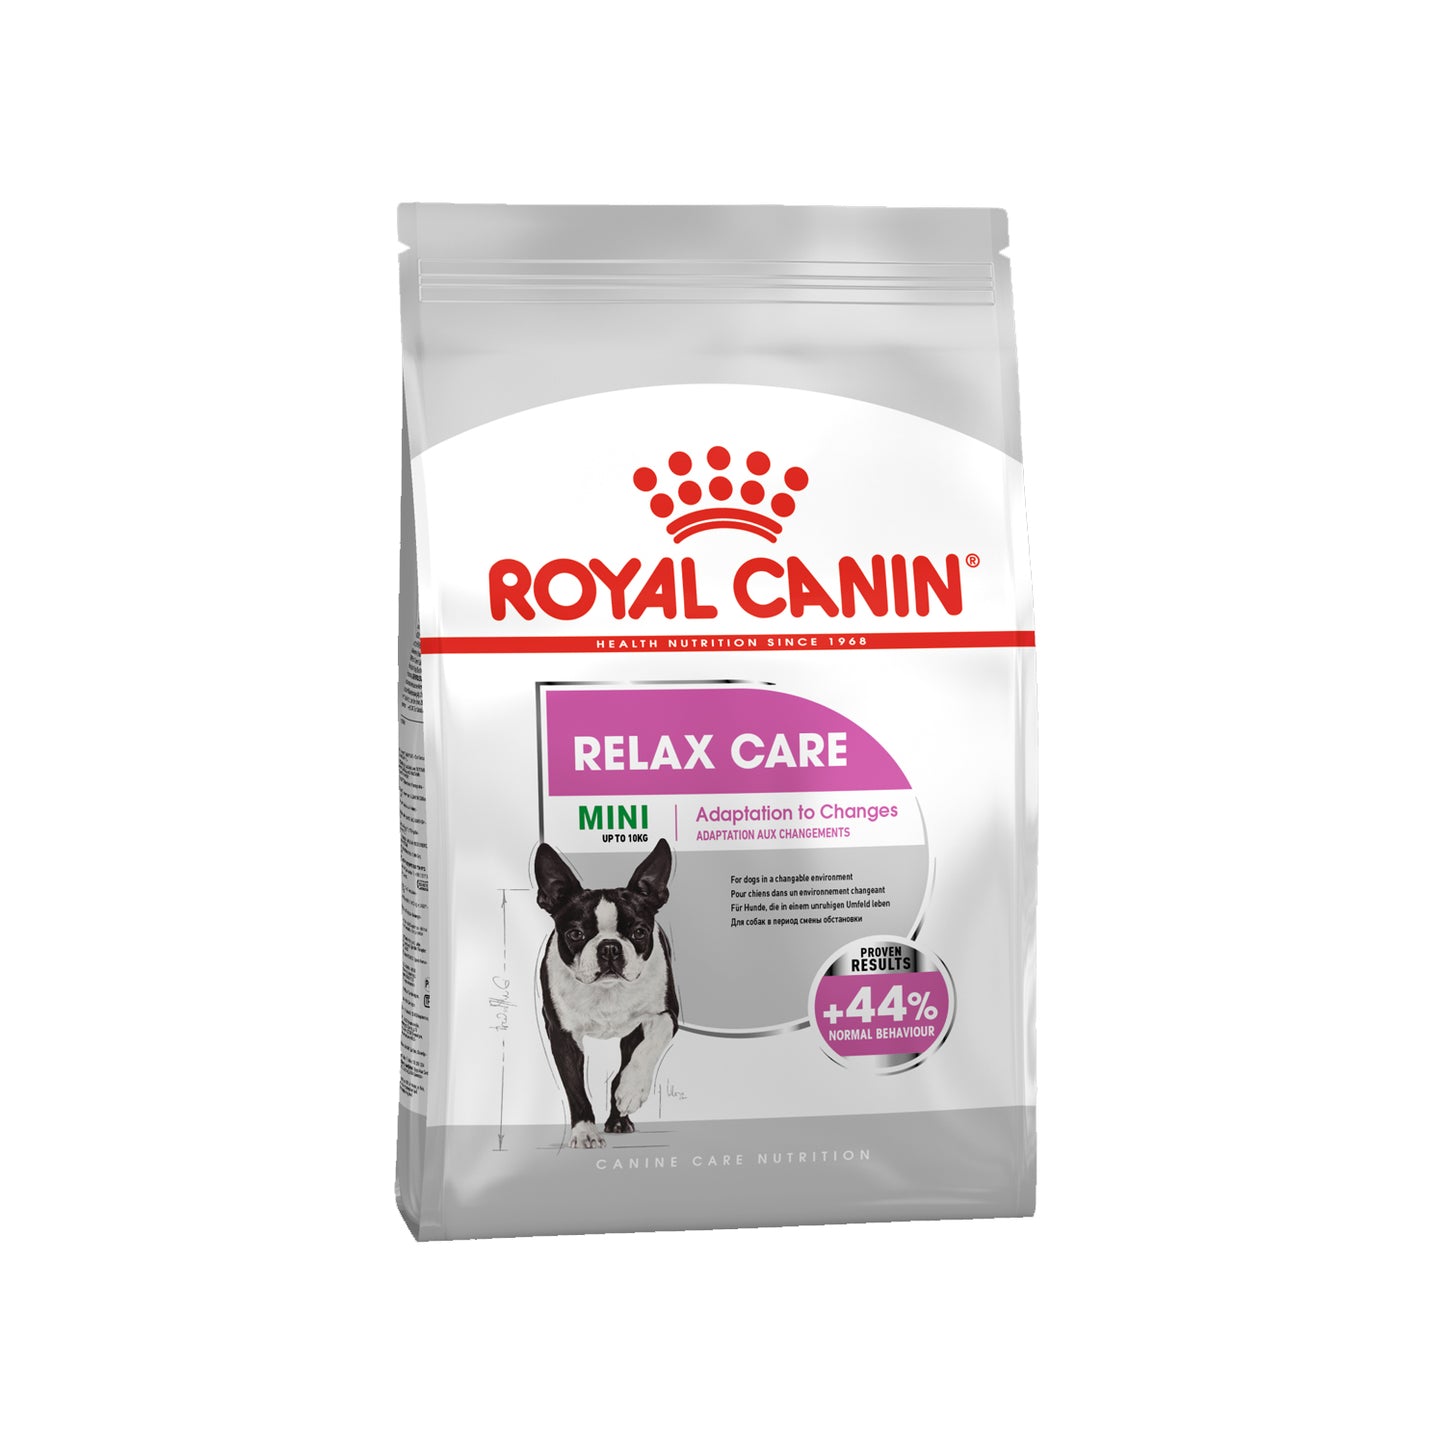 Royal Canin - Mini Relax Care Dry Dog Food